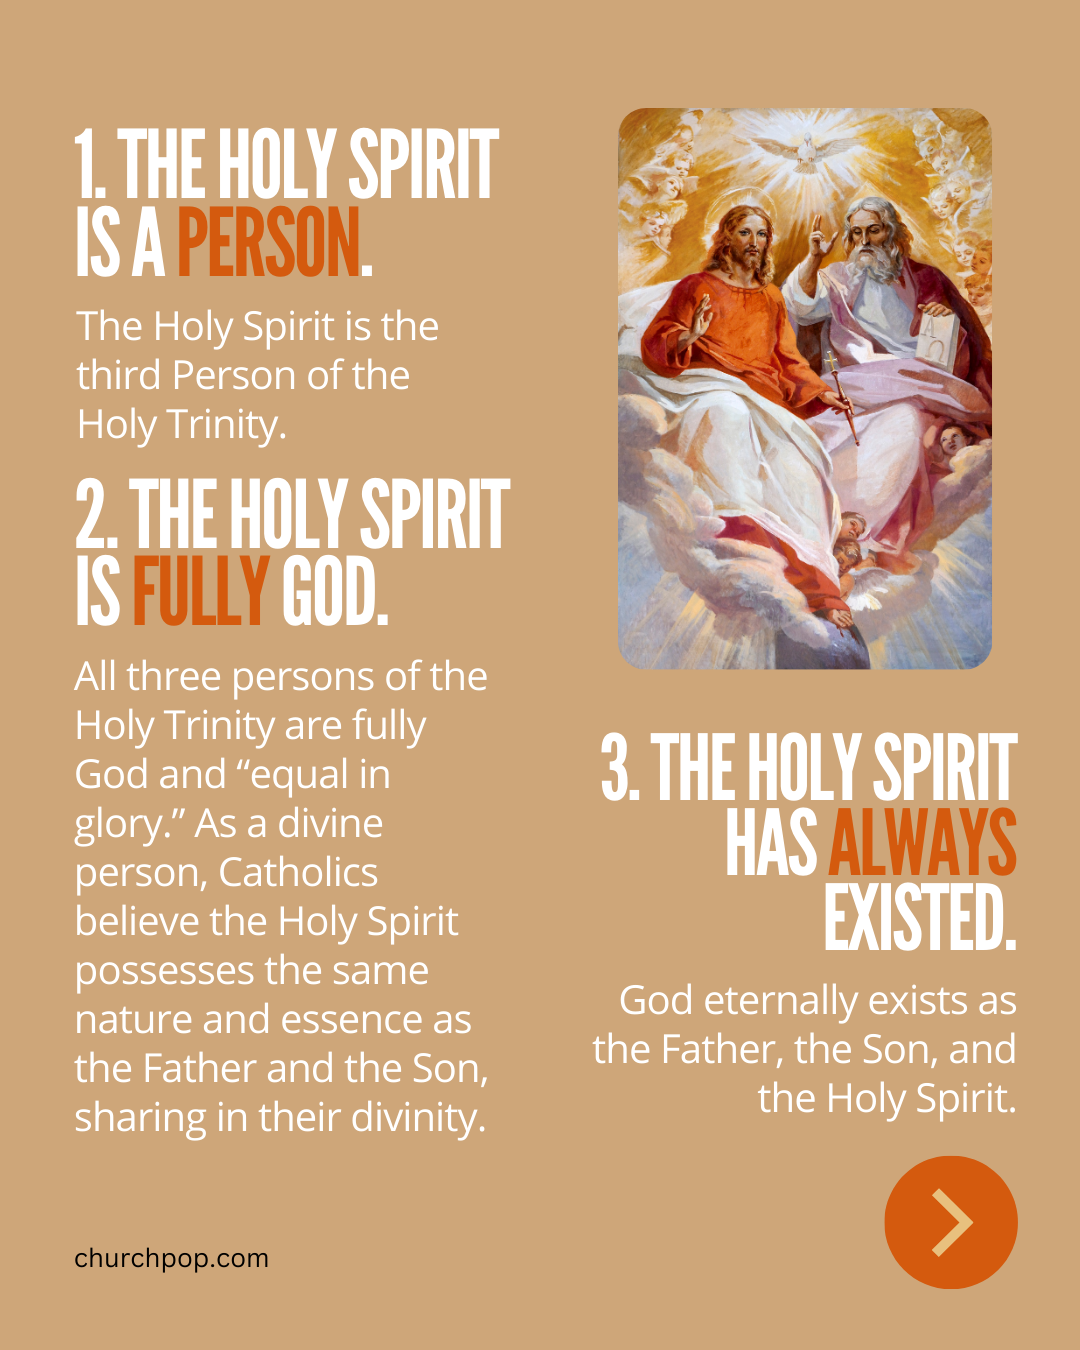 5 Things All Catholics Should Know About The Holy Spirit on Pentecost Sunday